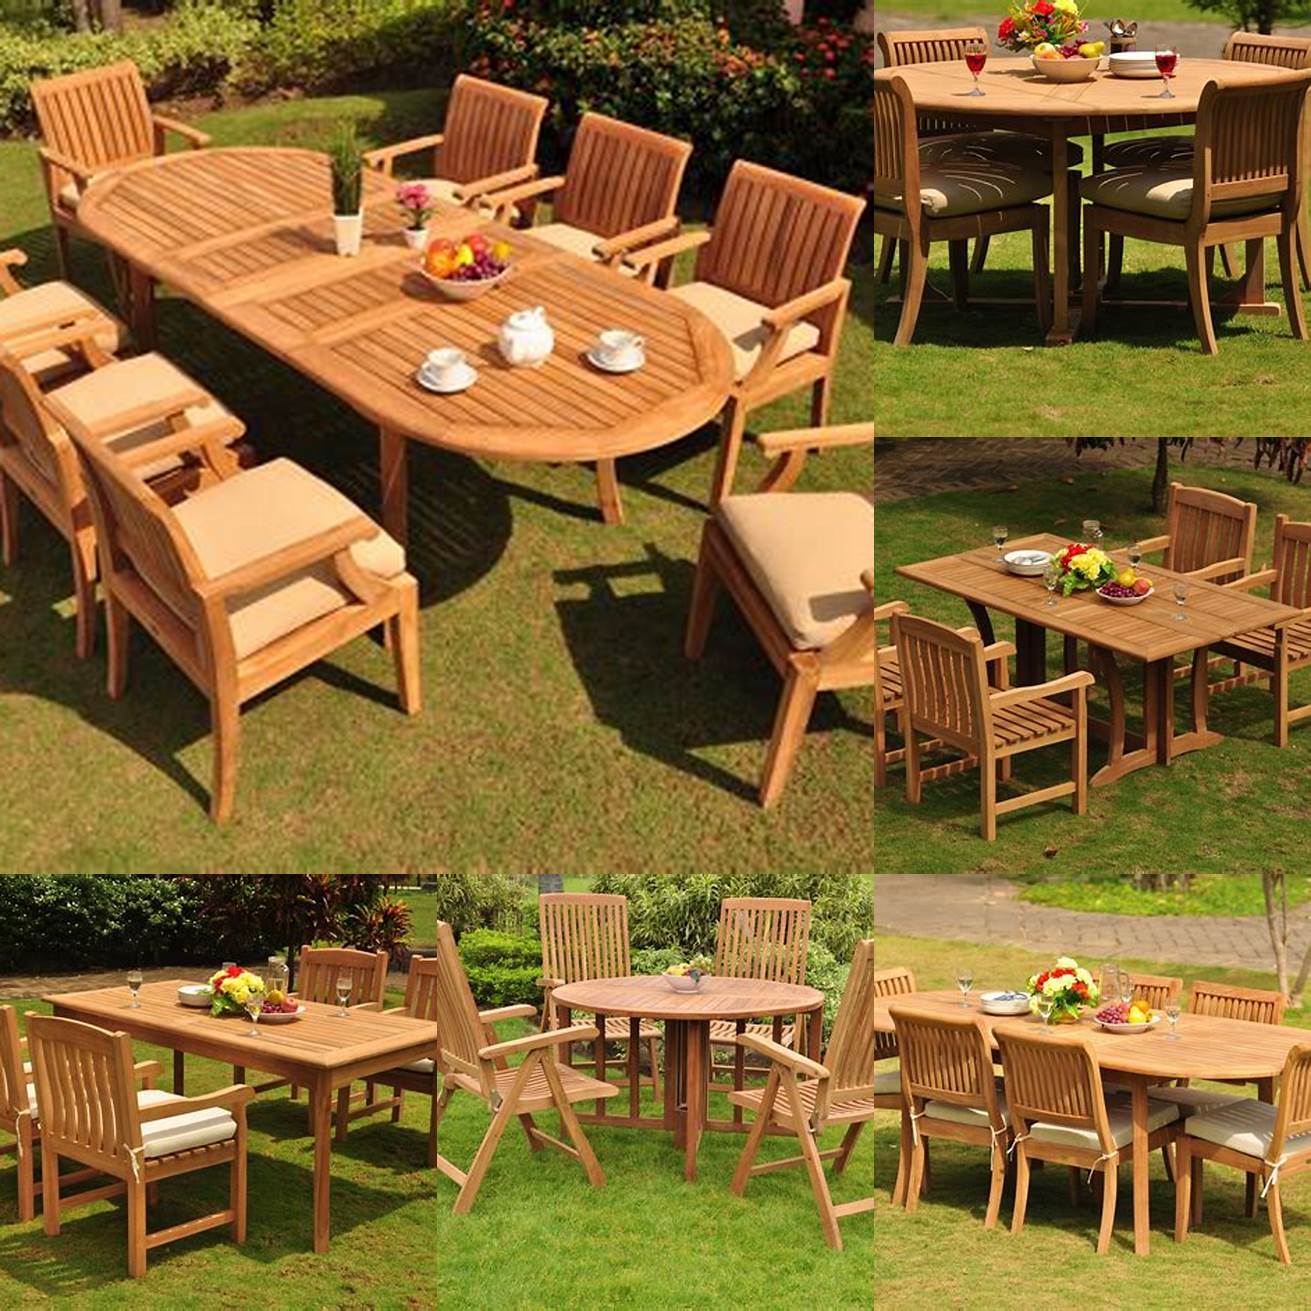 Teak Outdoor Dining Table with Chairs